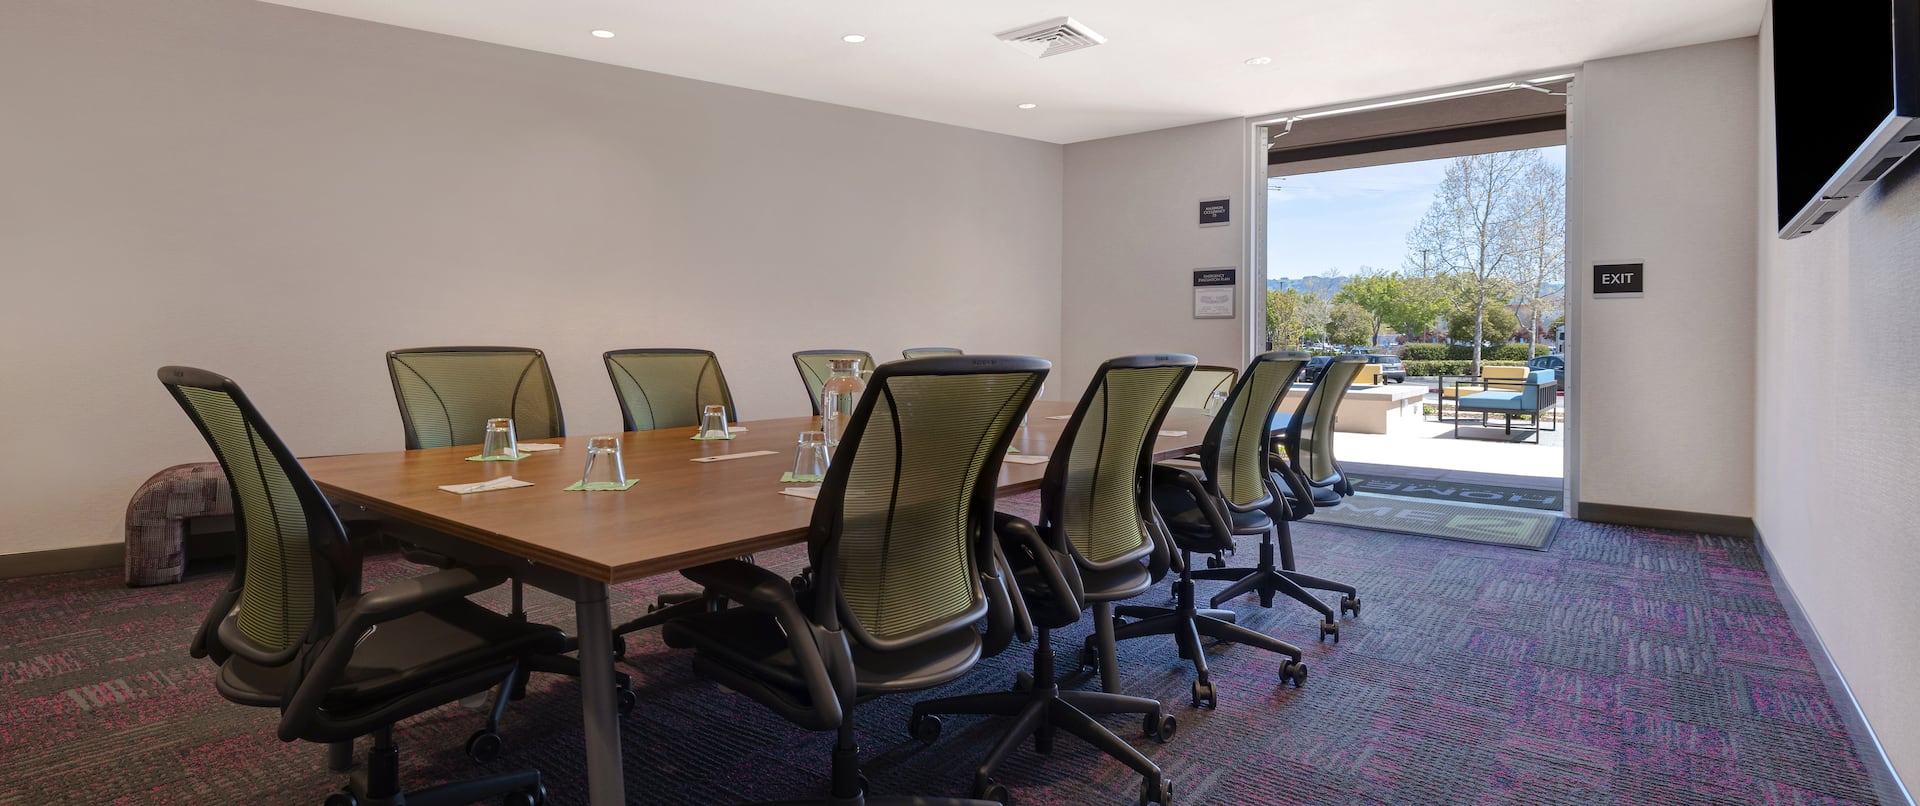 Boardroom with Sitting for Ten Guests and a HDTV